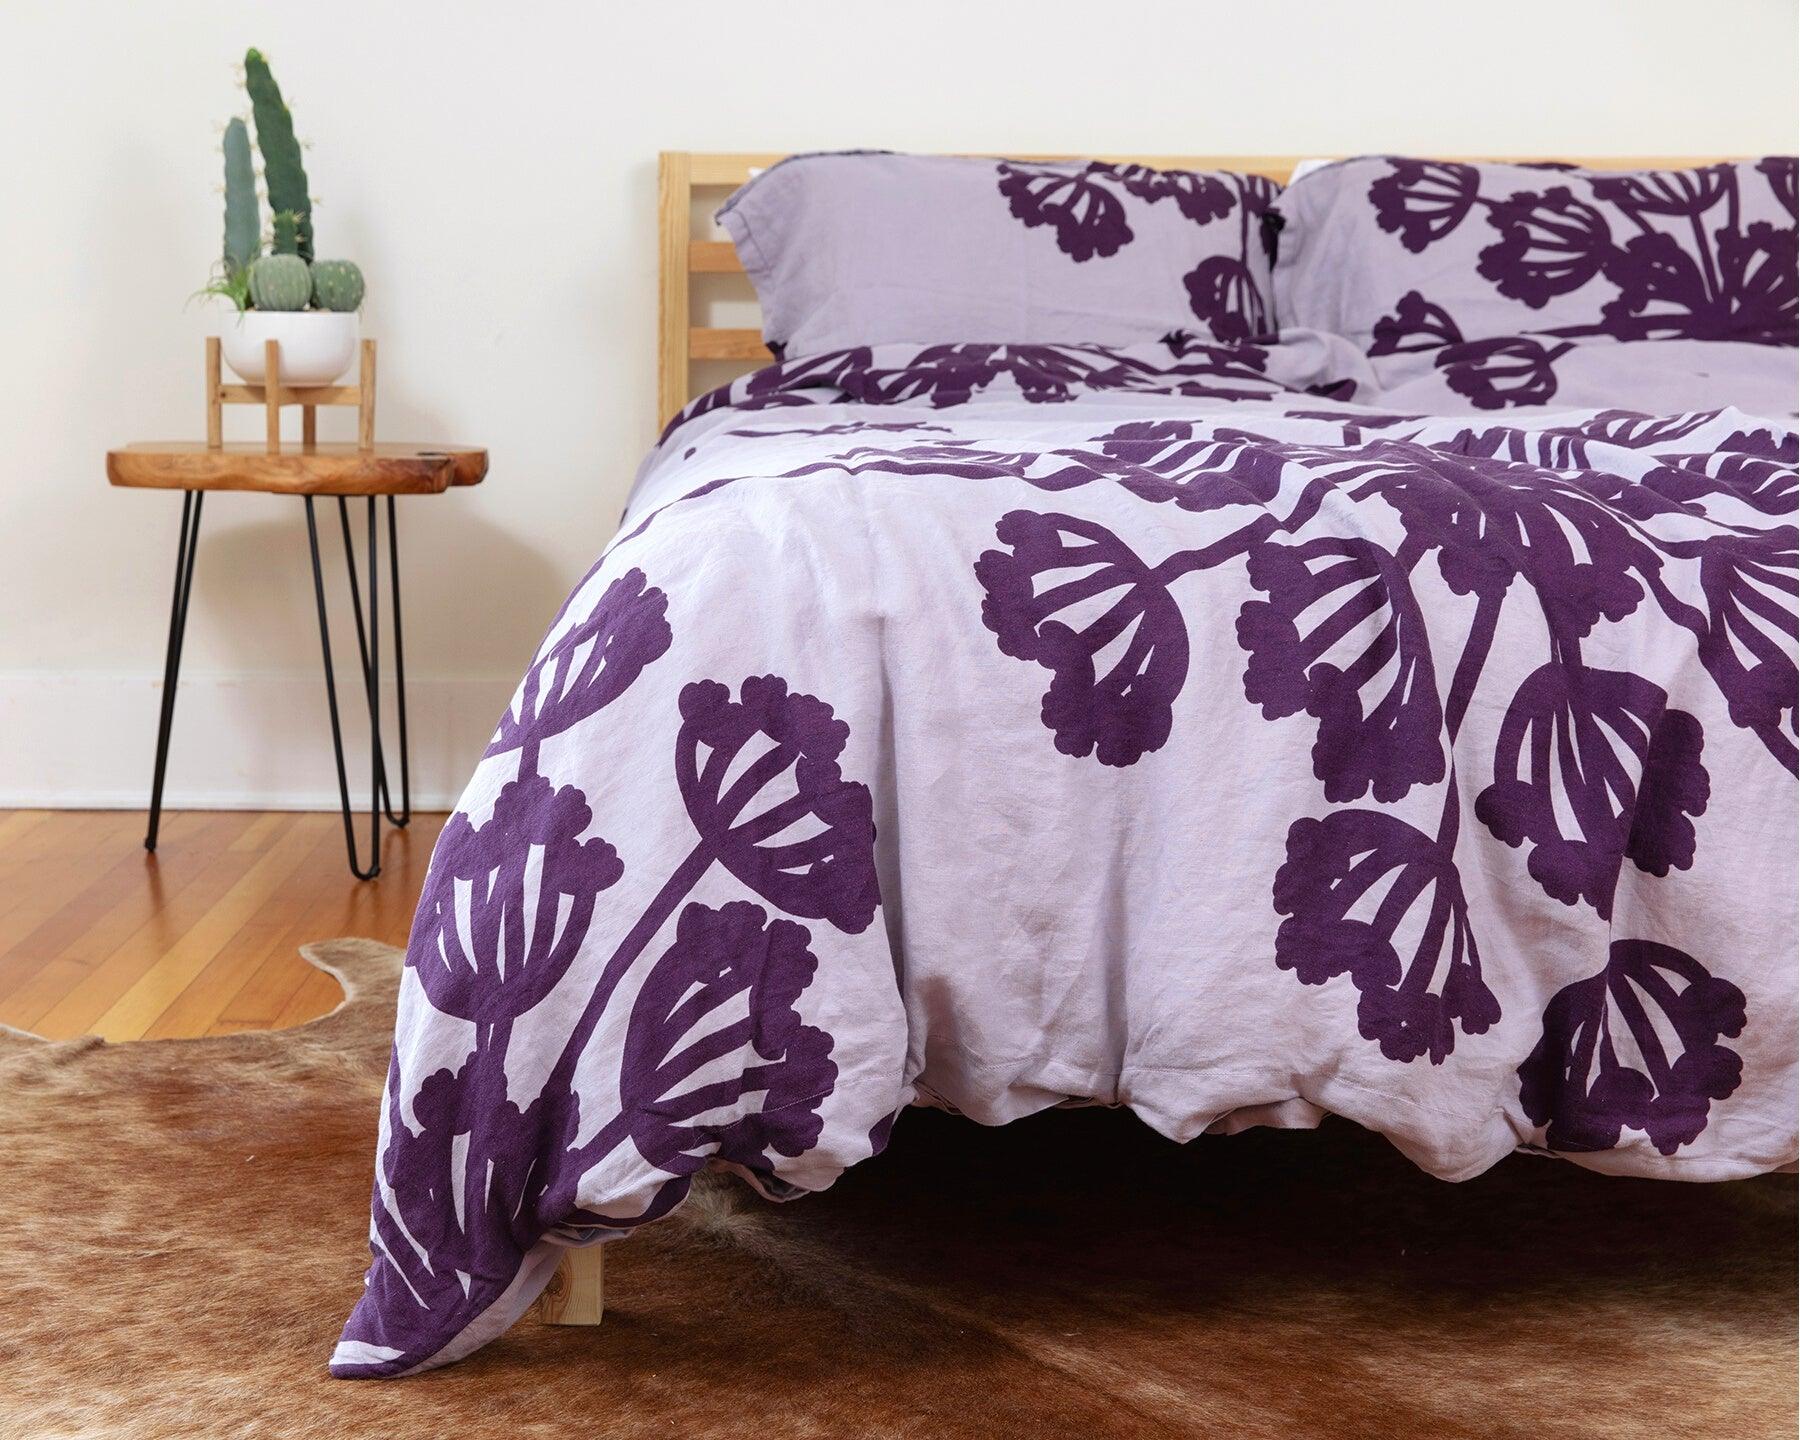 Purple European organic linen duvet cover with two matching pillow cases with floral design